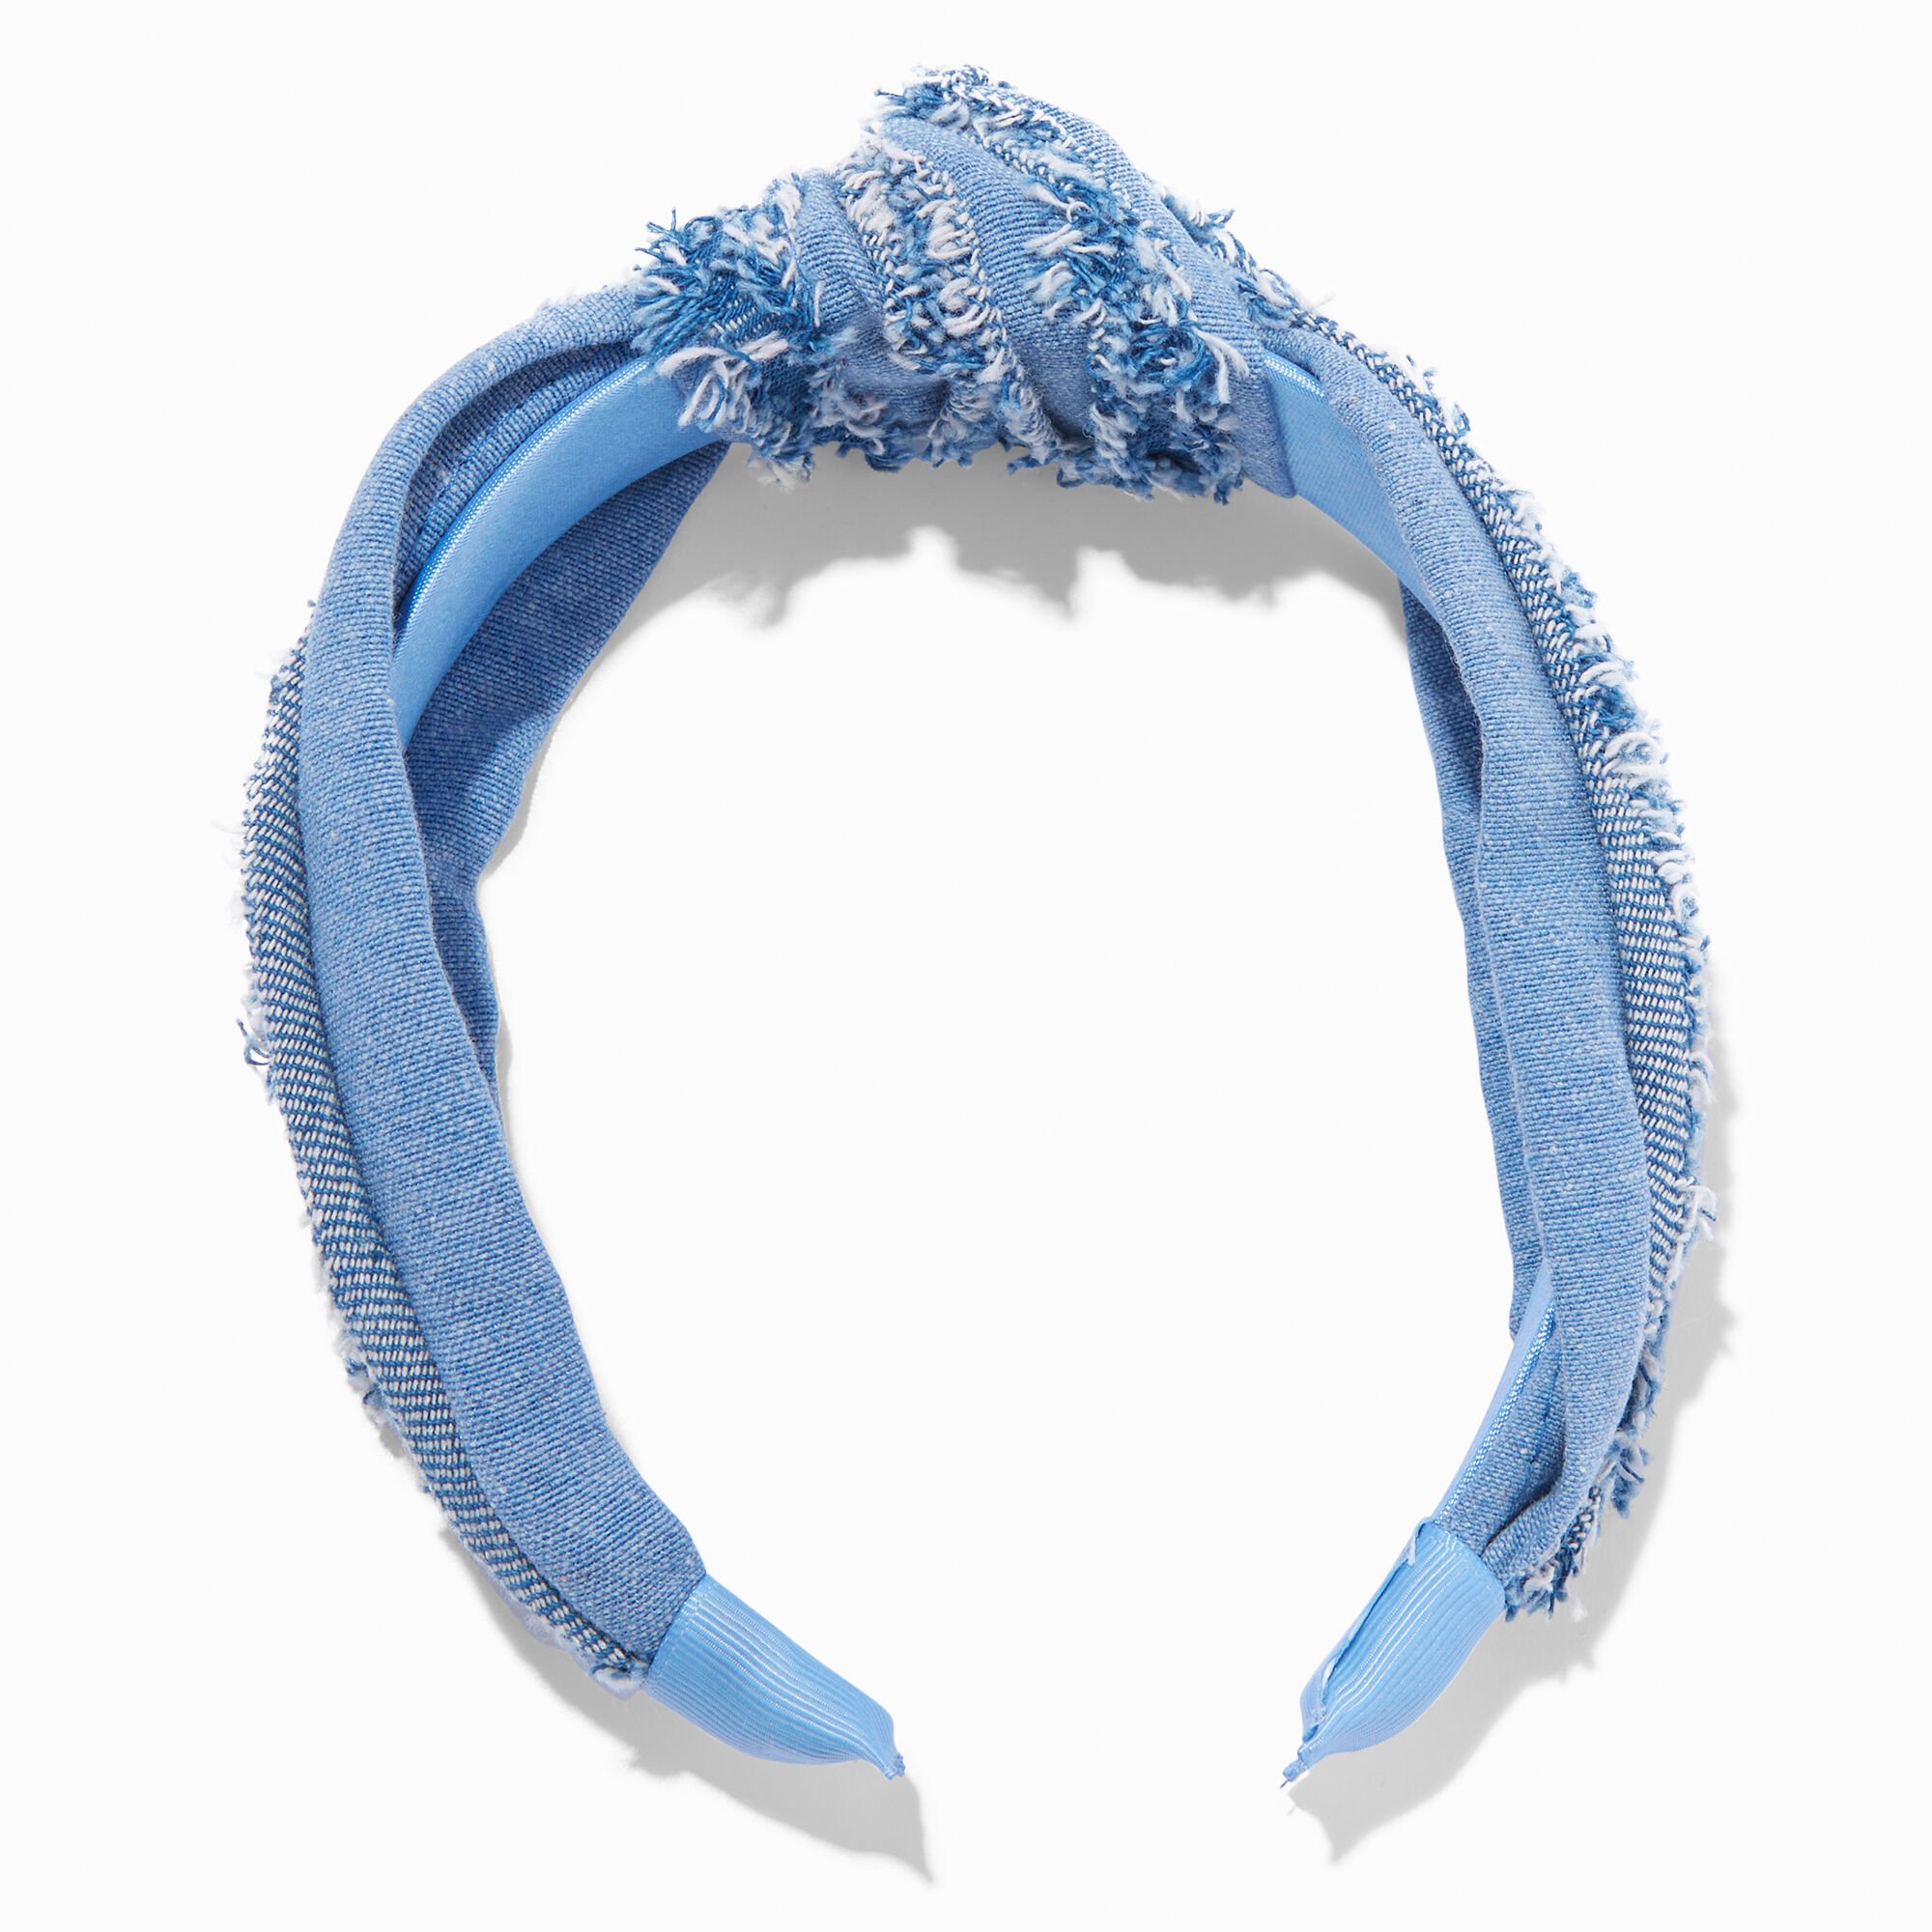 View Claires Frayed Look Denim Knotted Headband Blue information